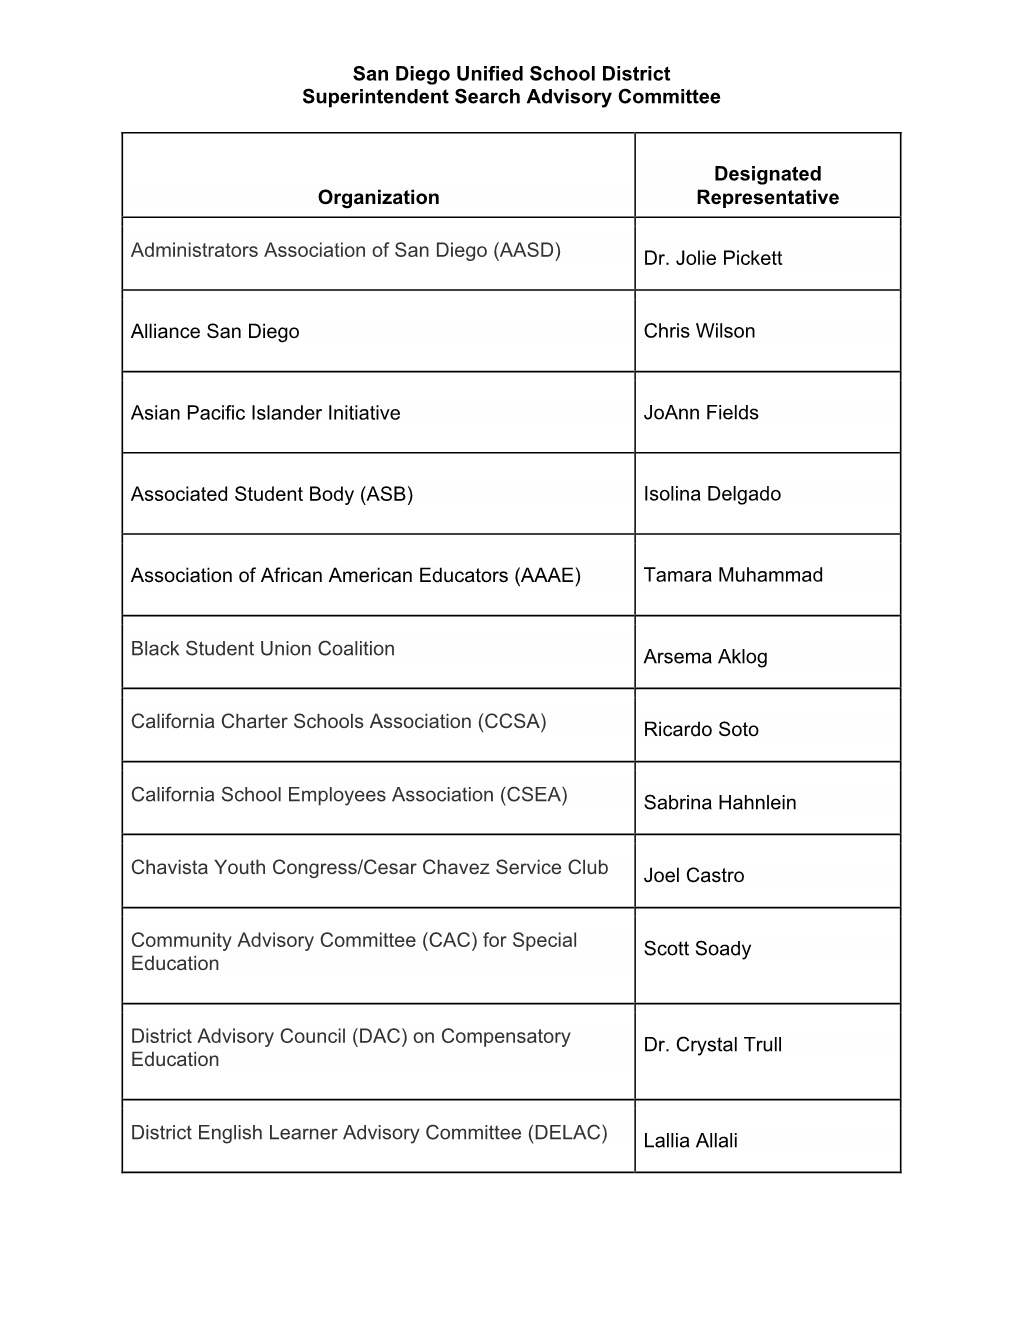 SDUSD Superintendent Search Advisory Committee Roster